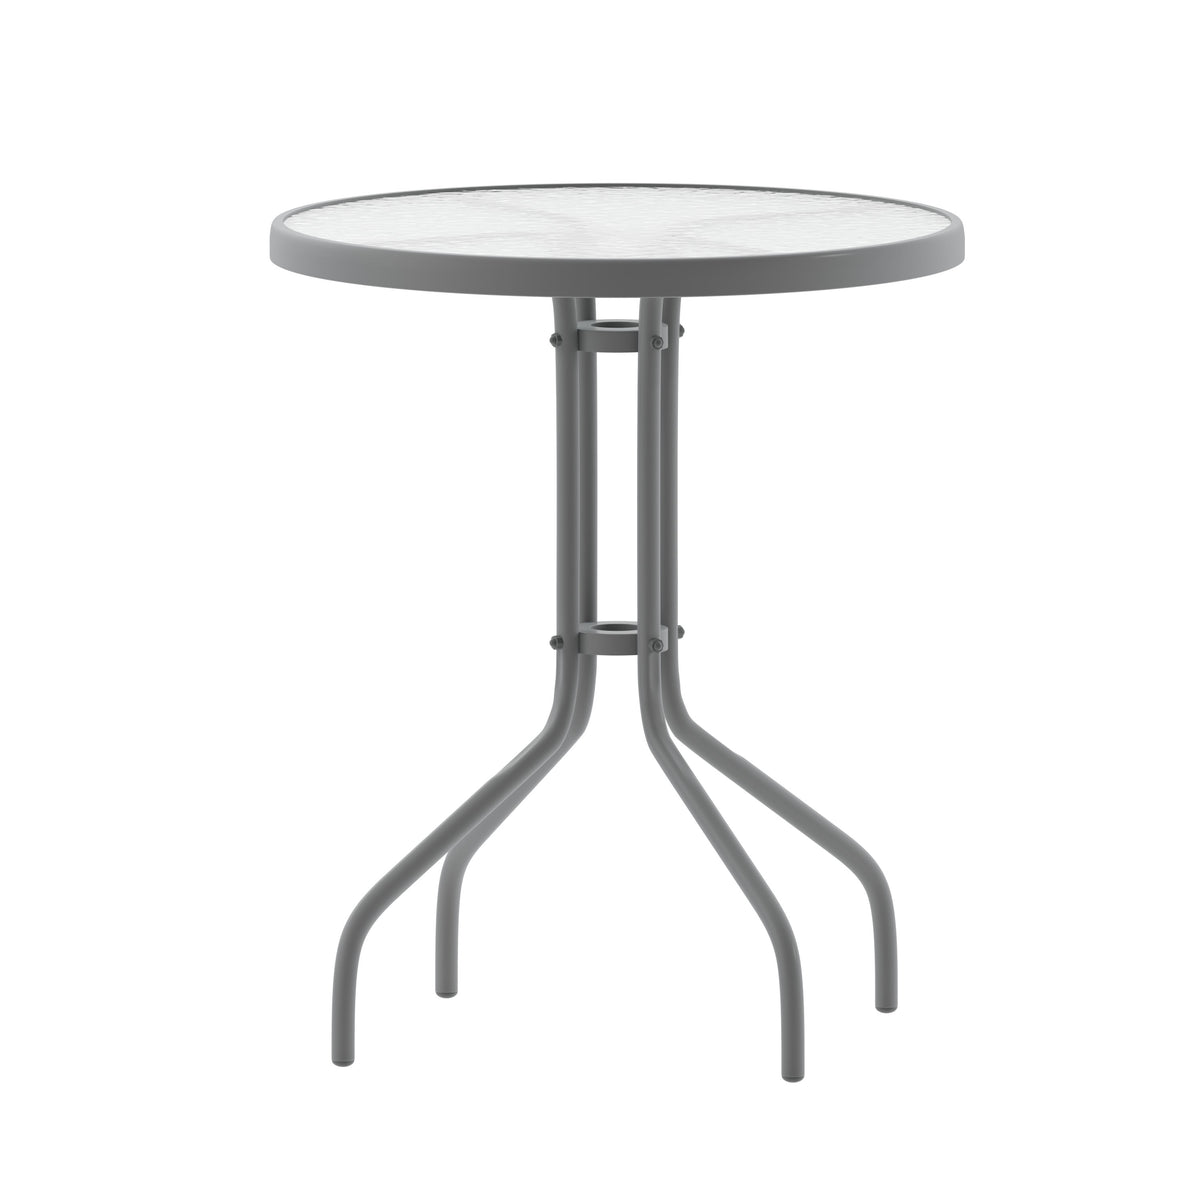 Silver |#| Modern 23.75inch Round Glass Framed Glass Table with 2 Silver Slat Back Chairs